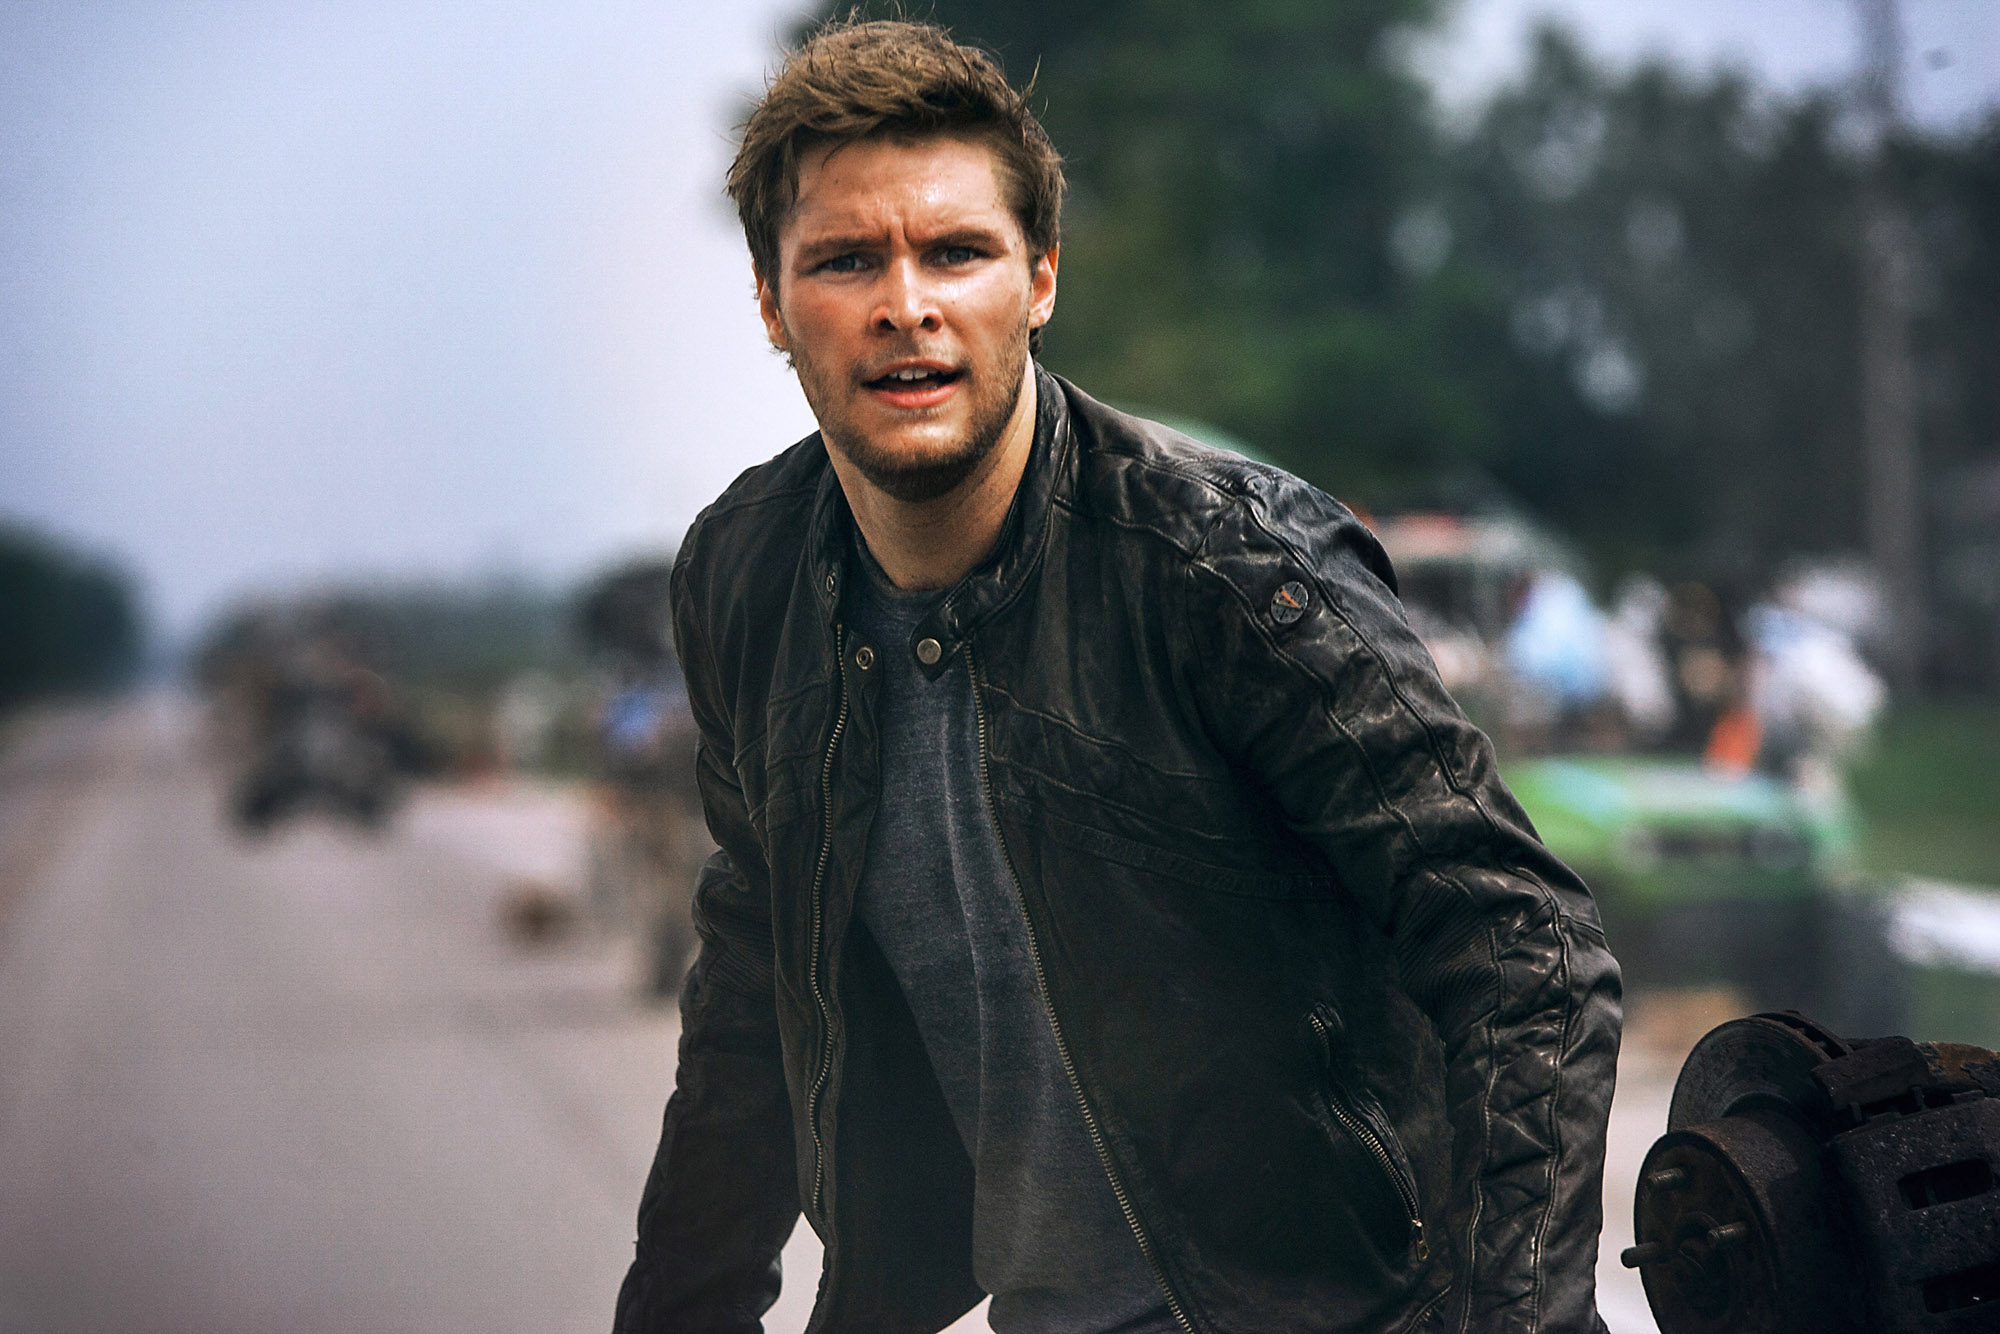 TRANSFORMERS: AGE OF EXTINCTION - 2014 FILM STILL - Jack Reynor - Photo Credit: Andrew Cooper/Paramount Pictures